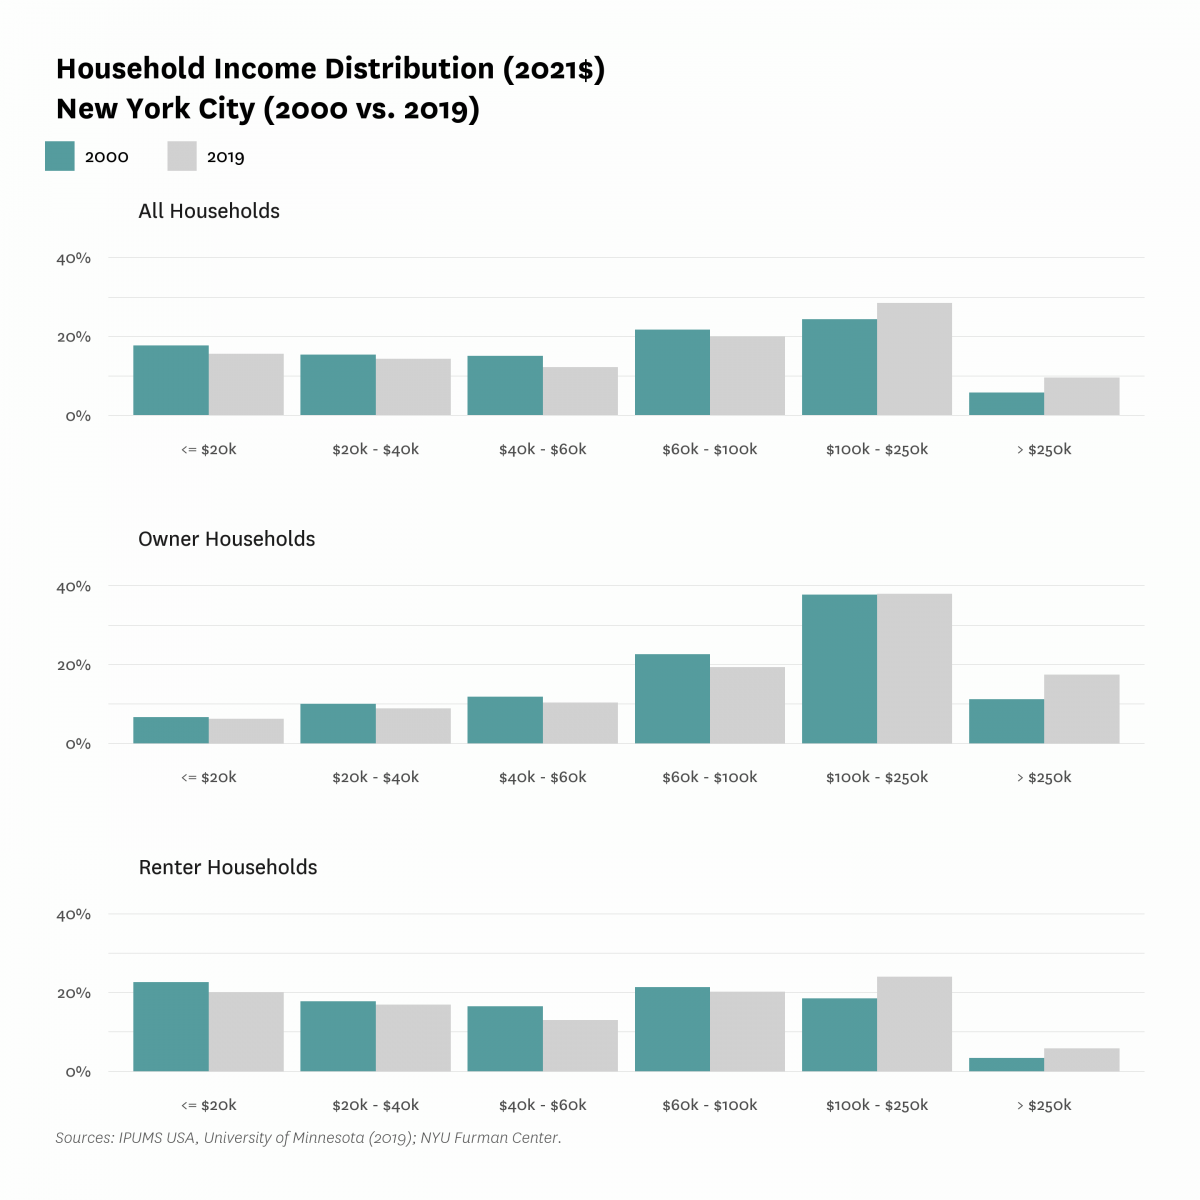 Bar graphs comparing the Household Income Distribution in New York City in 2000 and 2019, for all households, owner households, and renter households.